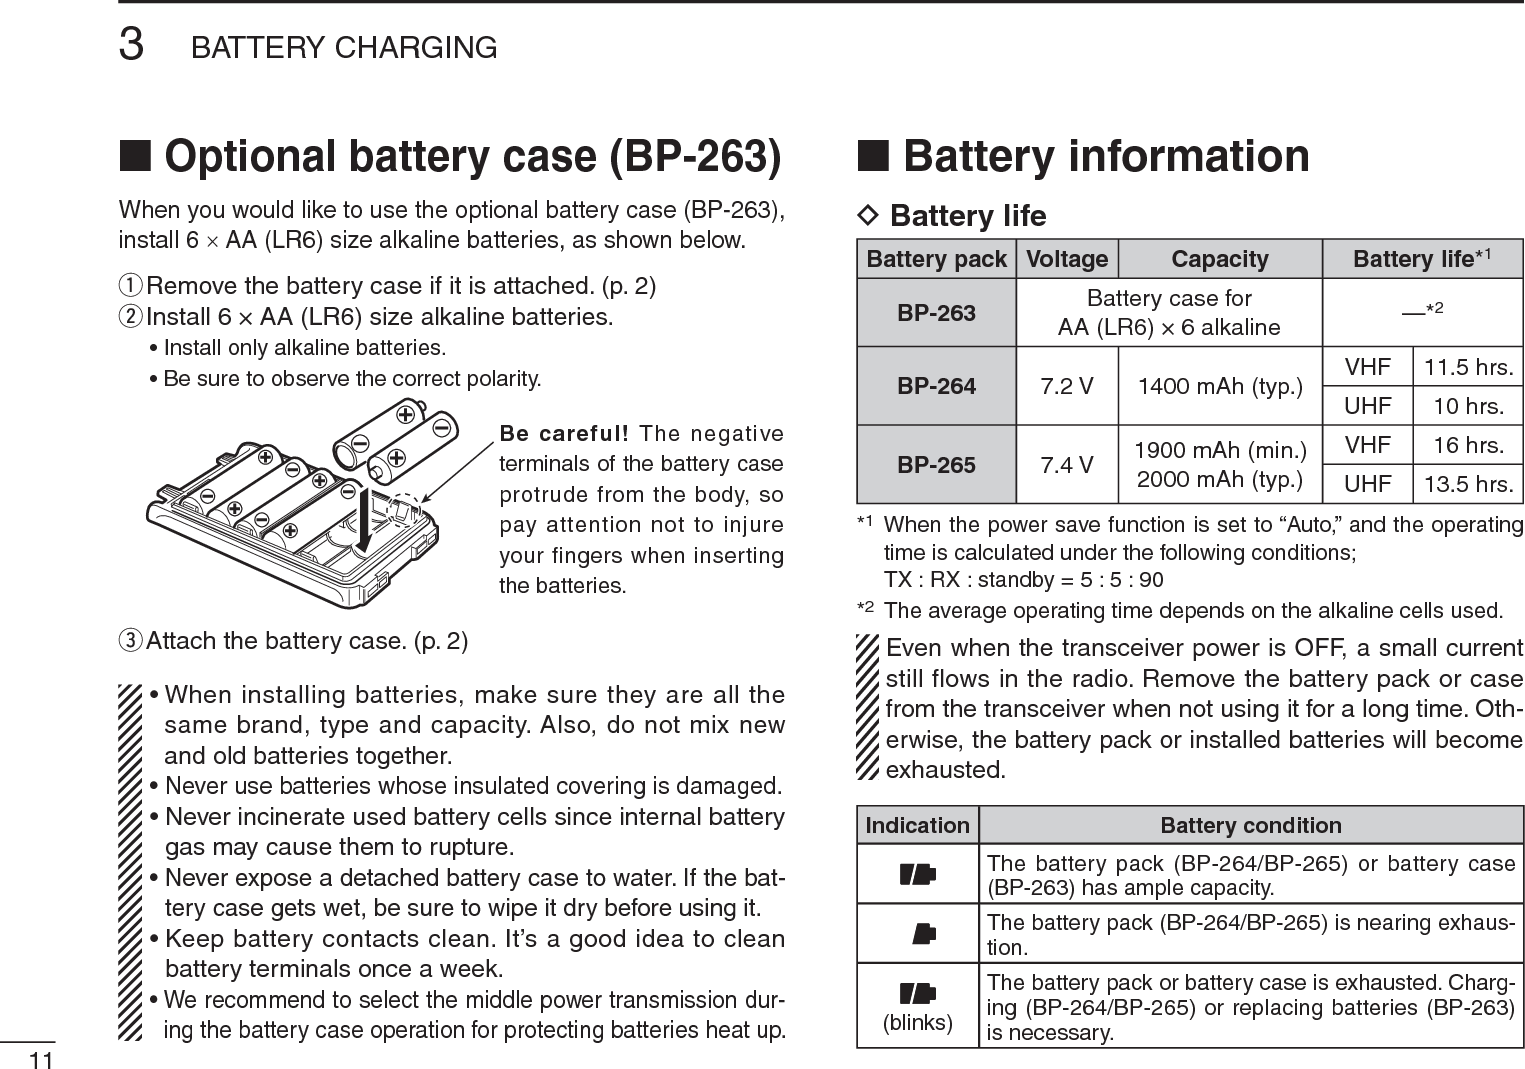 113BATTERY CHARGINGNOptional battery case (BP-263)When you would like to use the optional battery case (BP-263),install 6 uAA (LR6) size alkaline batteries, as shown below. q  Remove the battery case if it is attached. (p. 2)w  Install 6 × AA (LR6) size alkaline batteries.• Install only alkaline batteries.• Be sure to observe the correct polarity.e  Attach the battery case. (p. 2)• When installing batteries, make sure they are all the same brand, type and capacity. Also, do not mix new and old batteries together.• Never use batteries whose insulated covering is damaged.• Never incinerate used battery cells since internal battery gas may cause them to rupture.• Never expose a detached battery case to water. If the bat-tery case gets wet, be sure to wipe it dry before using it.• Keep battery contacts clean. It’s a good idea to clean battery terminals once a week.• We recommend to select the middle power transmission dur-ing the battery case operation for protecting batteries heat up.N Battery informationD Battery lifeBattery pack Voltage Capacity Battery life*1BP-263 Battery case forAA (LR6) × 6 alkaline —*2BP-264 7.2 V 1400 mAh (typ.) VHF 11.5 hrs.UHF 10 hrs.BP-265 7.4 V 1900 mAh (min.)2000 mAh (typ.)VHF 16 hrs.UHF 13.5 hrs.*1  When the power save function is set to “Auto,” and the operating time is calculated under the following conditions;TX : RX : standby = 5 : 5 : 90*2The average operating time depends on the alkaline cells used.Even when the transceiver power is OFF, a small current still flows in the radio. Remove the battery pack or case from the transceiver when not using it for a long time. Oth-erwise, the battery pack or installed batteries will become exhausted.Indication Battery conditionThe battery pack (BP-264/BP-265) or battery case (BP-263) has ample capacity.The battery pack (BP-264/BP-265) is nearing exhaus-tion.(blinks)The battery pack or battery case is exhausted. Charg-ing (BP-264/BP-265) or replacing batteries (BP-263)is necessary.Be careful! The negative terminals of the battery case protrude from the body, so pay attention not to injure your fingers when inserting the batteries.